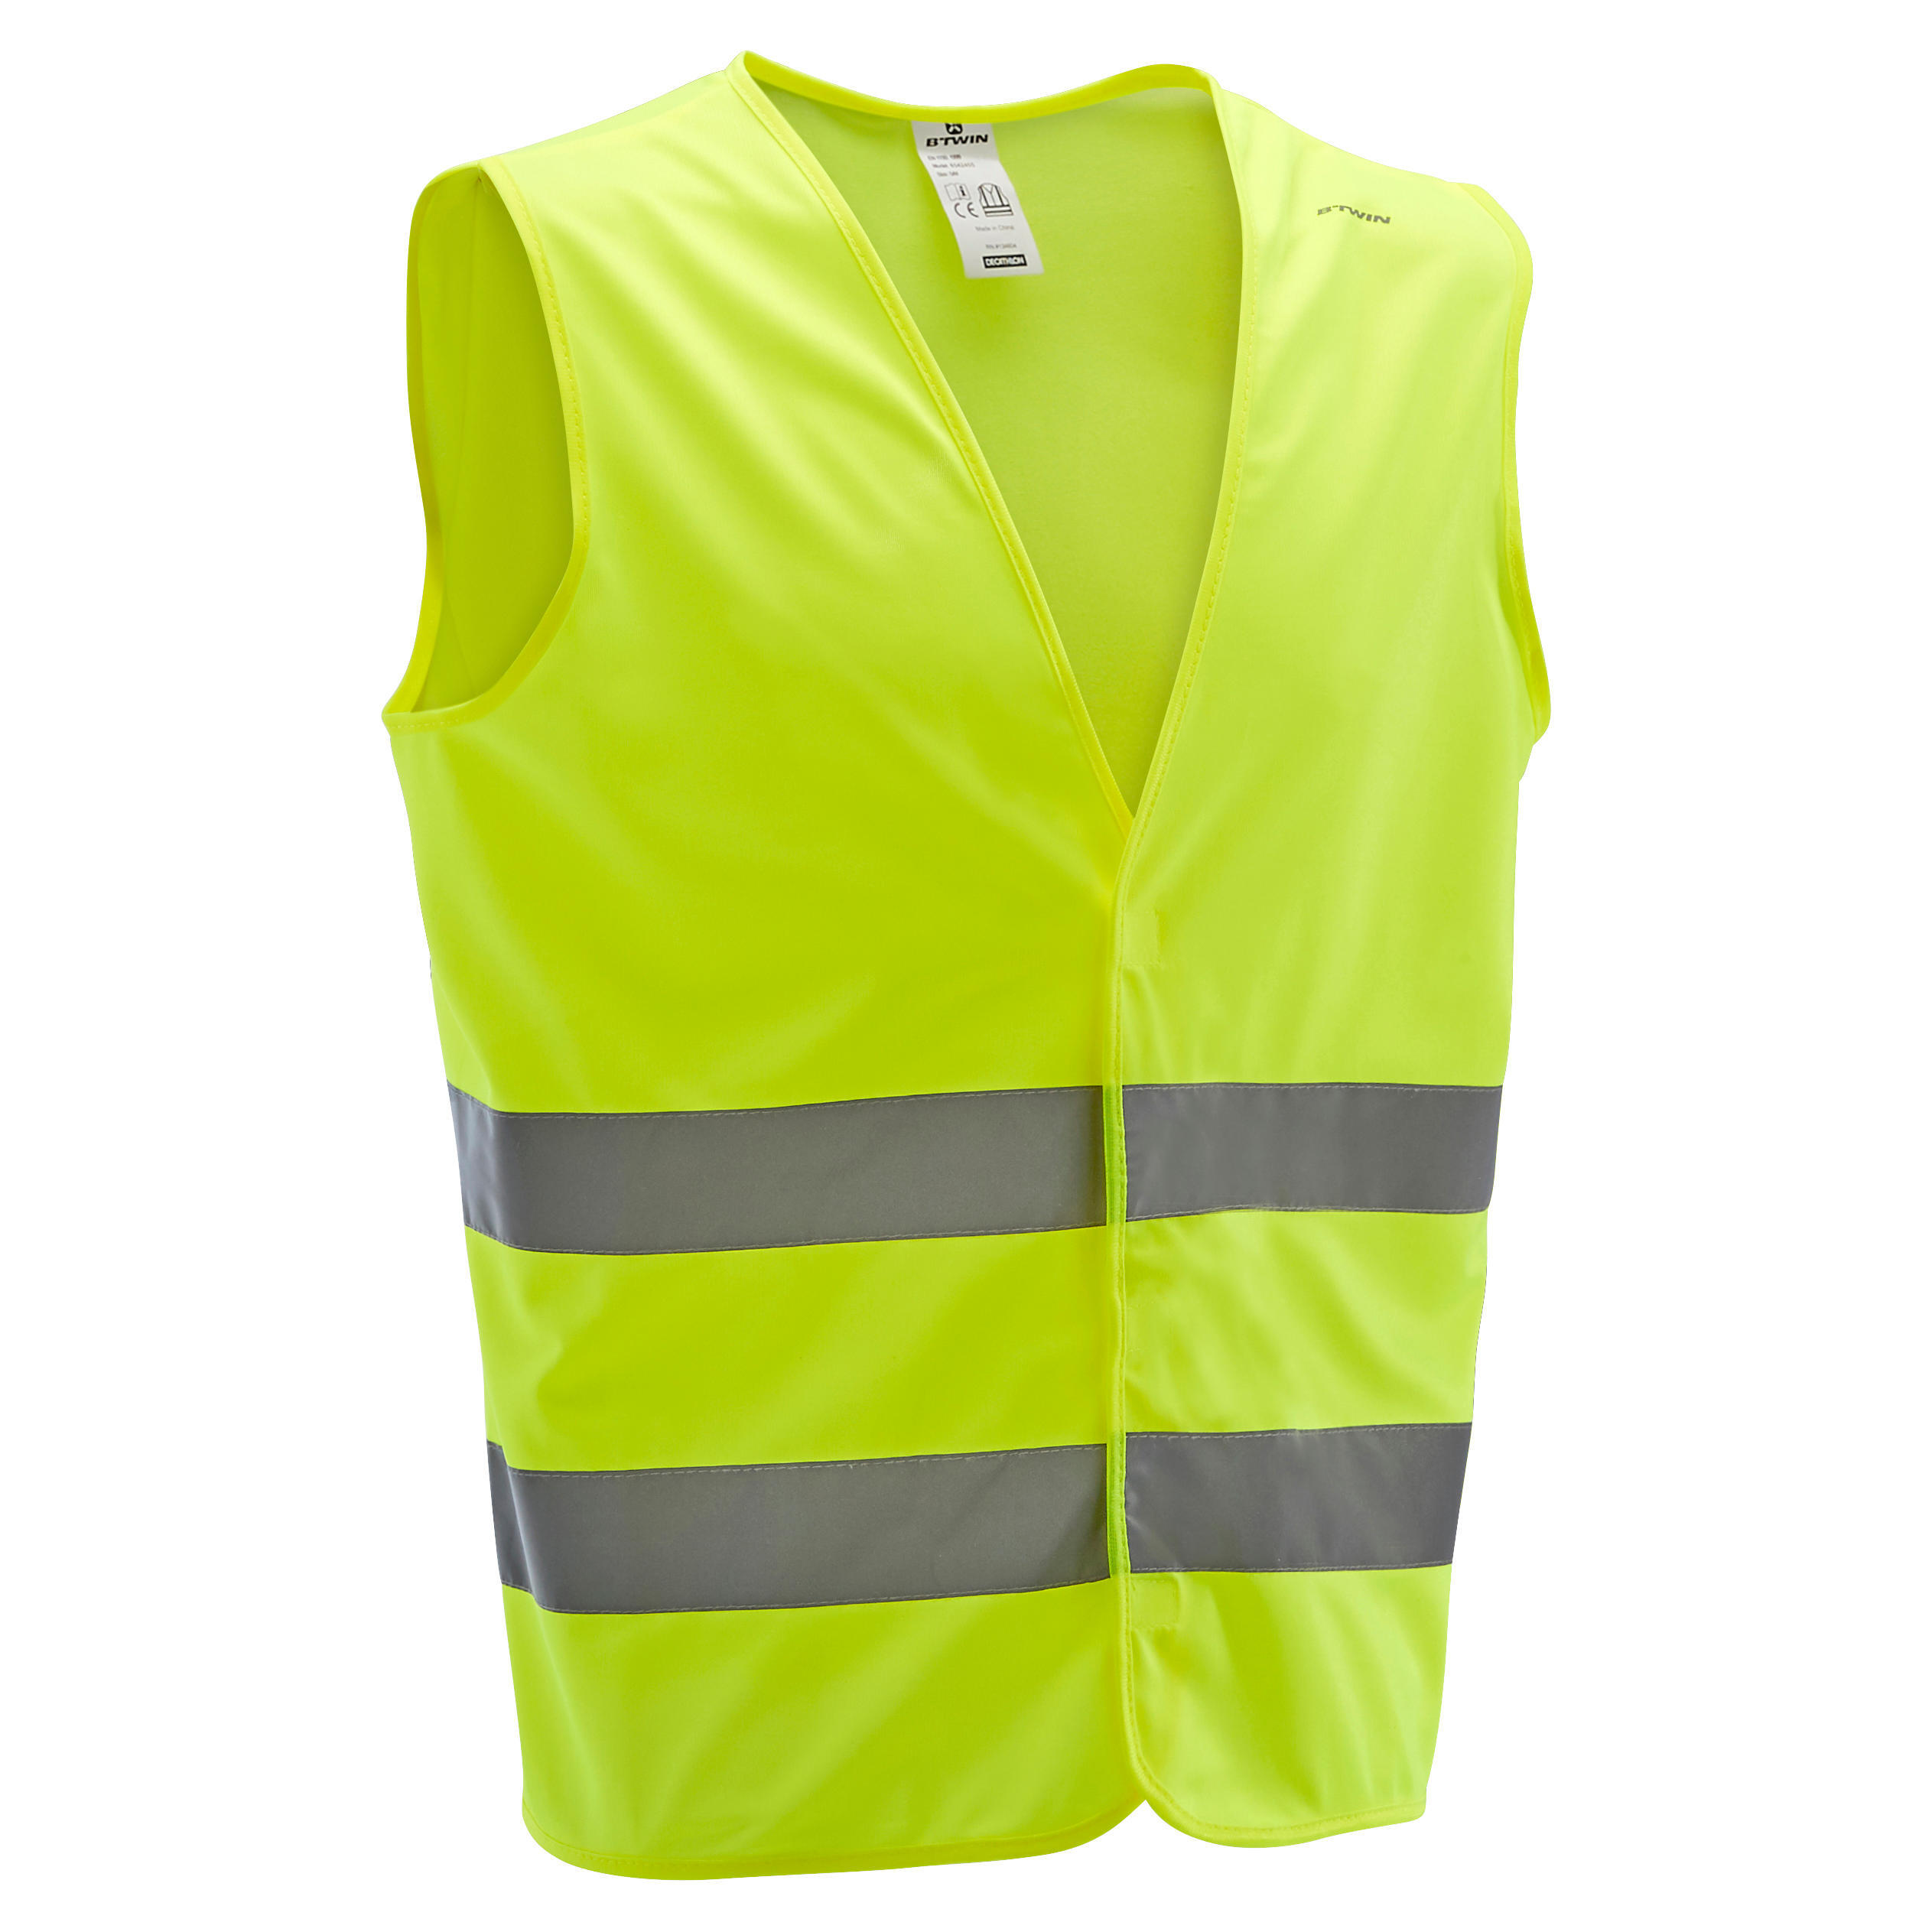 BTWIN Adult High Visibility Safety Vest 500 - Neon Yellow